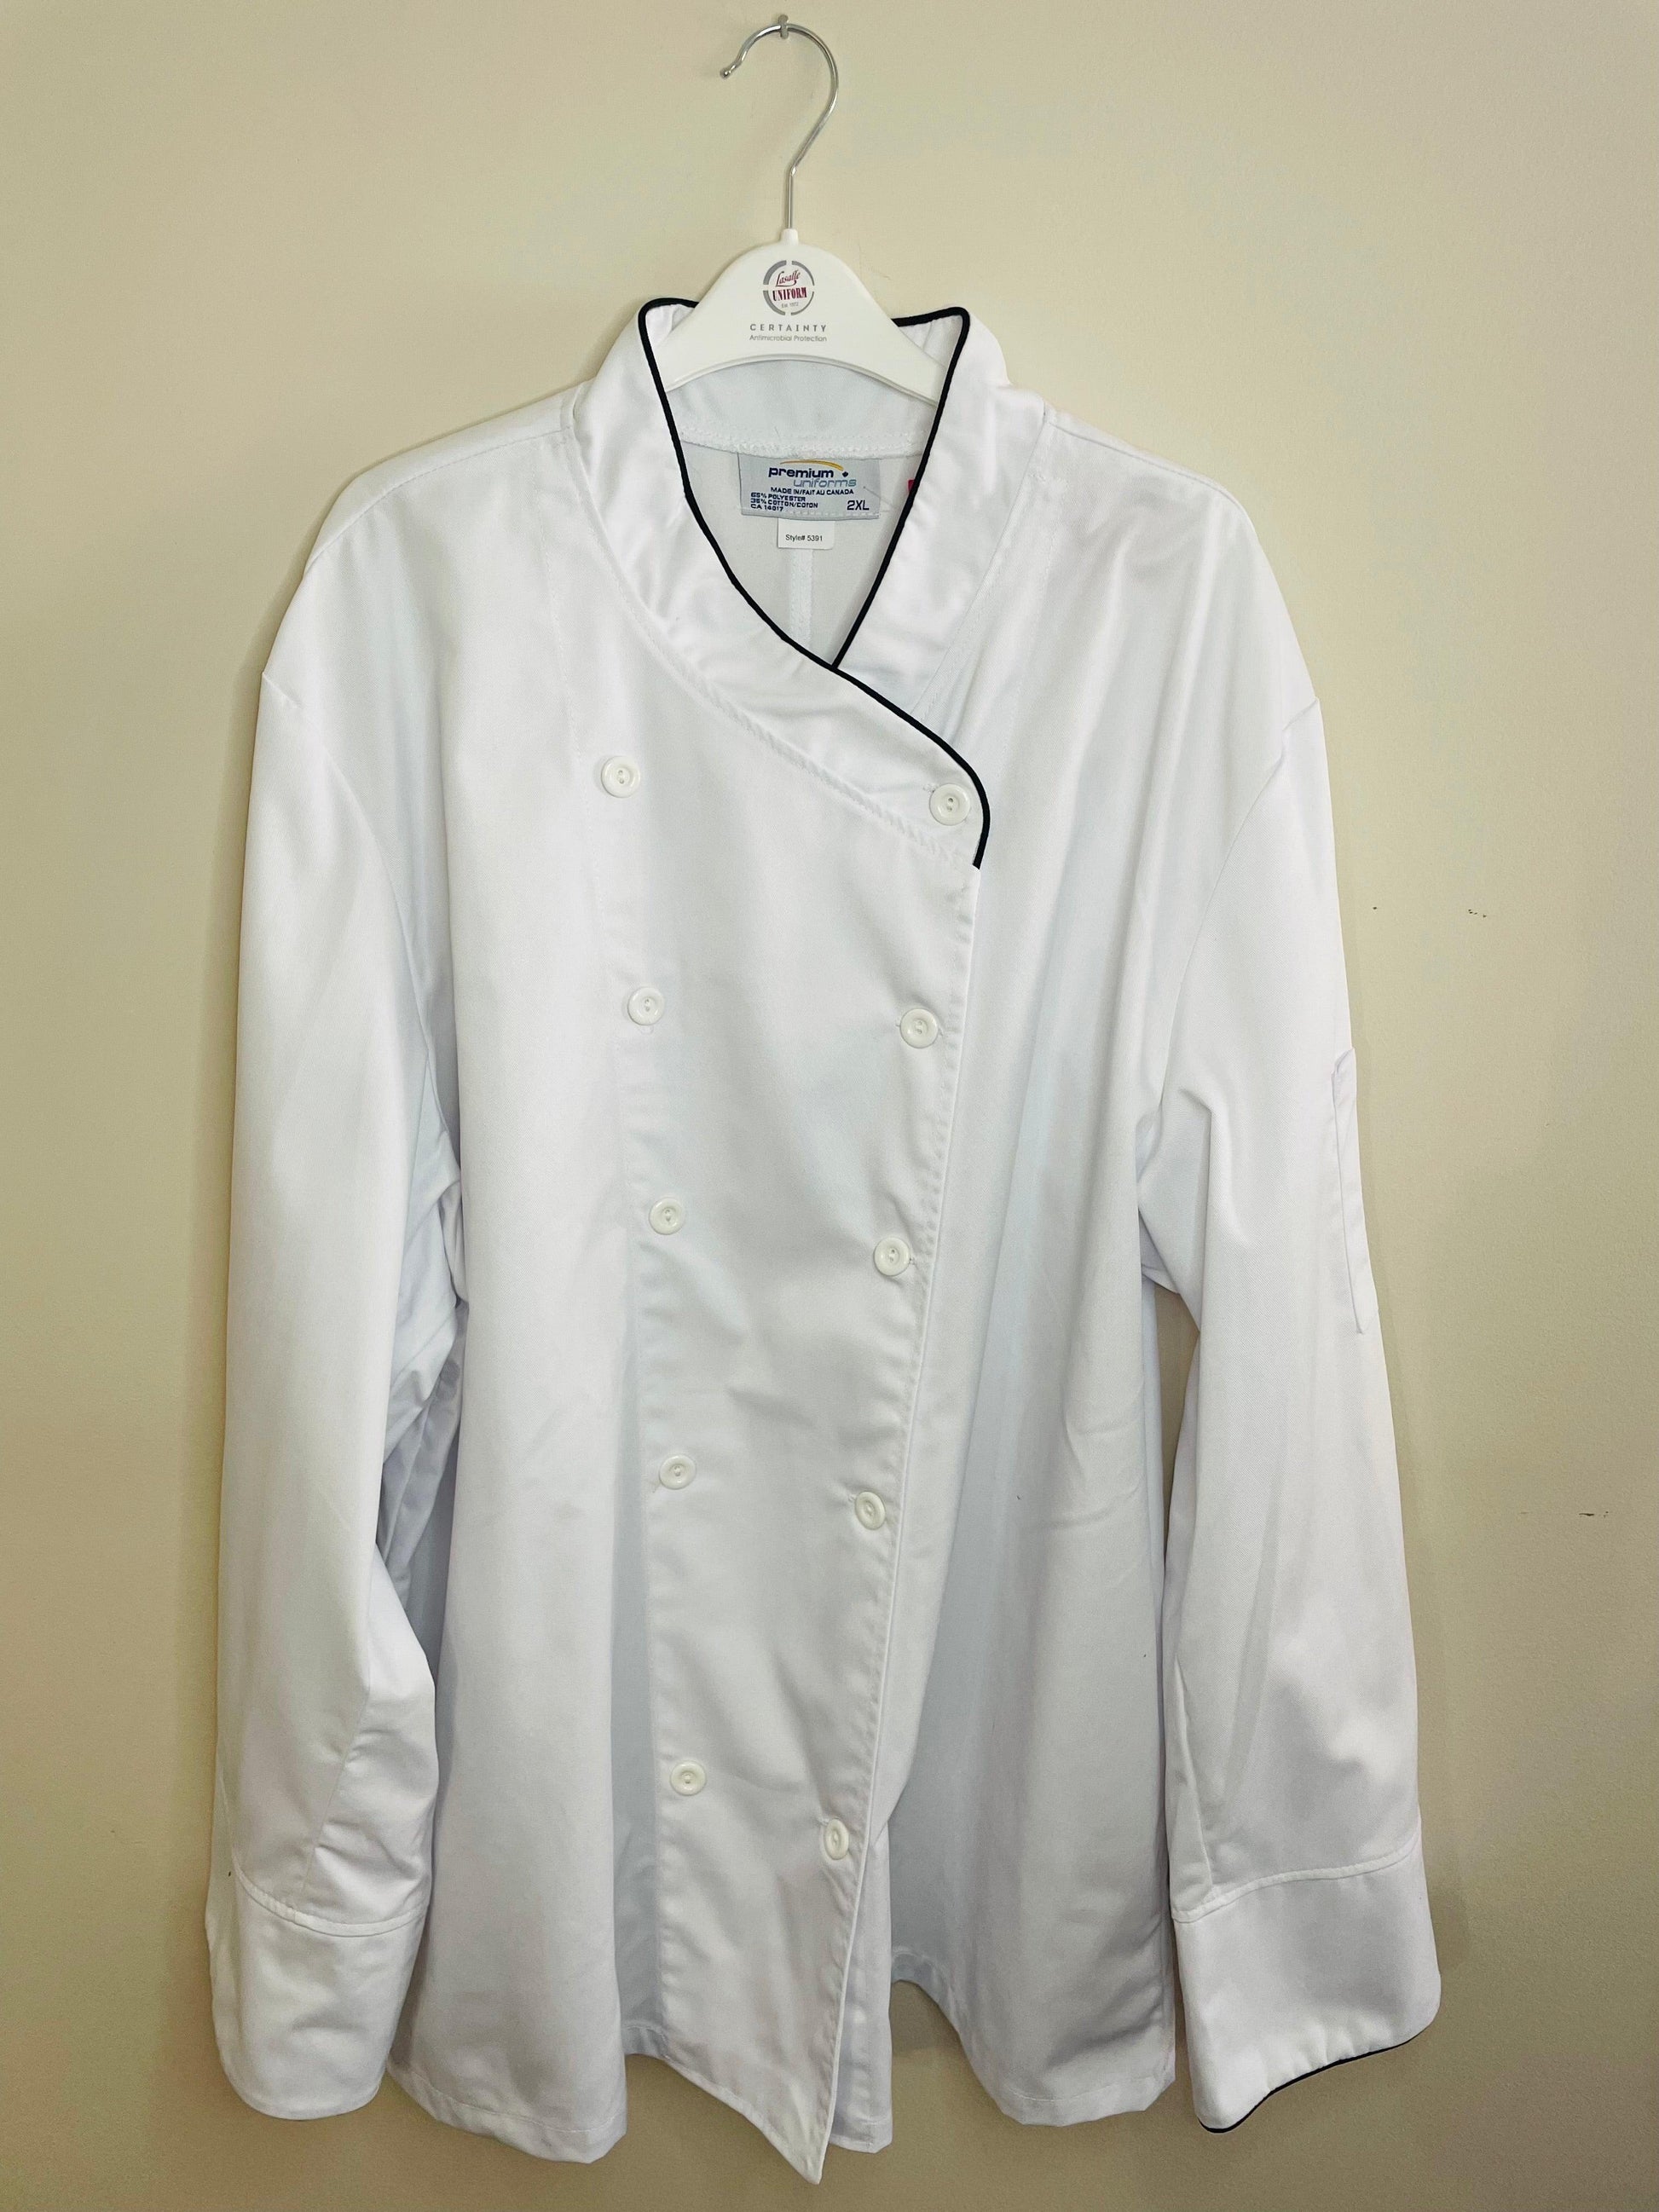 Long Sleeve White Chef Coat with black trim 2X and 4X only Chef Coat Premium Uniforms WHITE 2X 